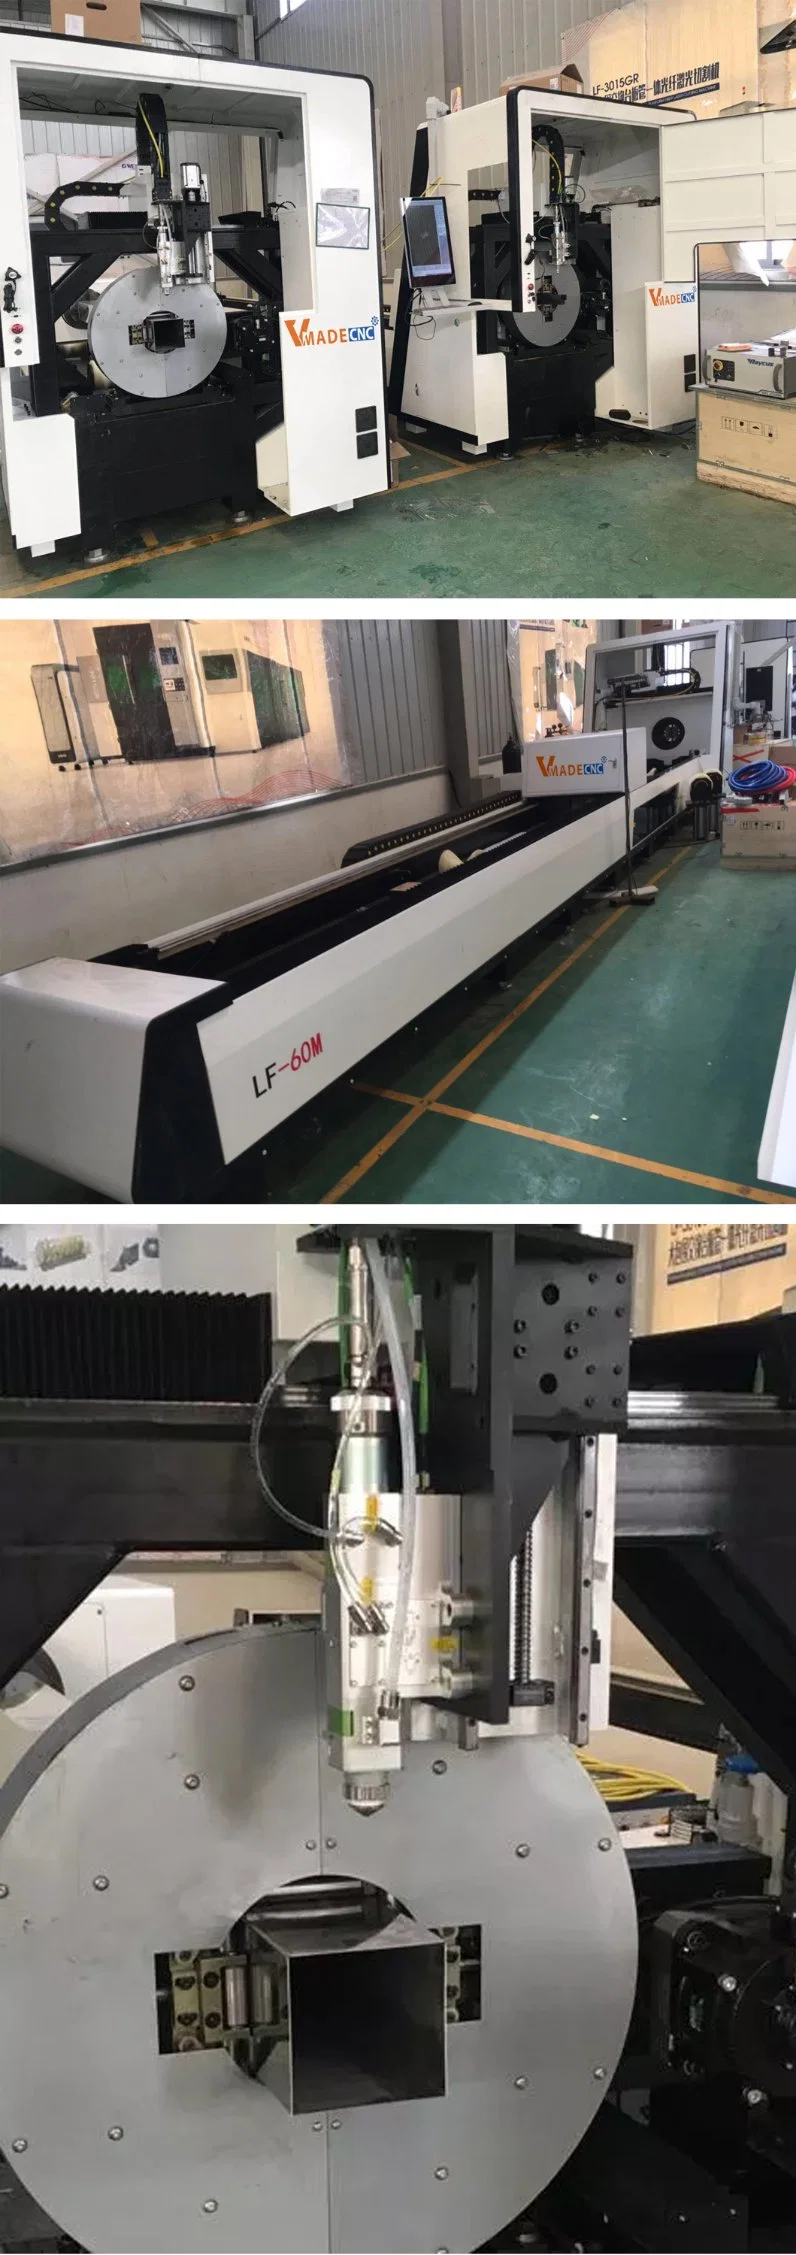 1kw 2000W 3000 Watt CNC Laser Cutter Fiber/CO2 Table Top CNC Laser Machine for Sheet Plate Metal Aluminum Carbon Steel Stainless Steel Tube Pipe Cutting